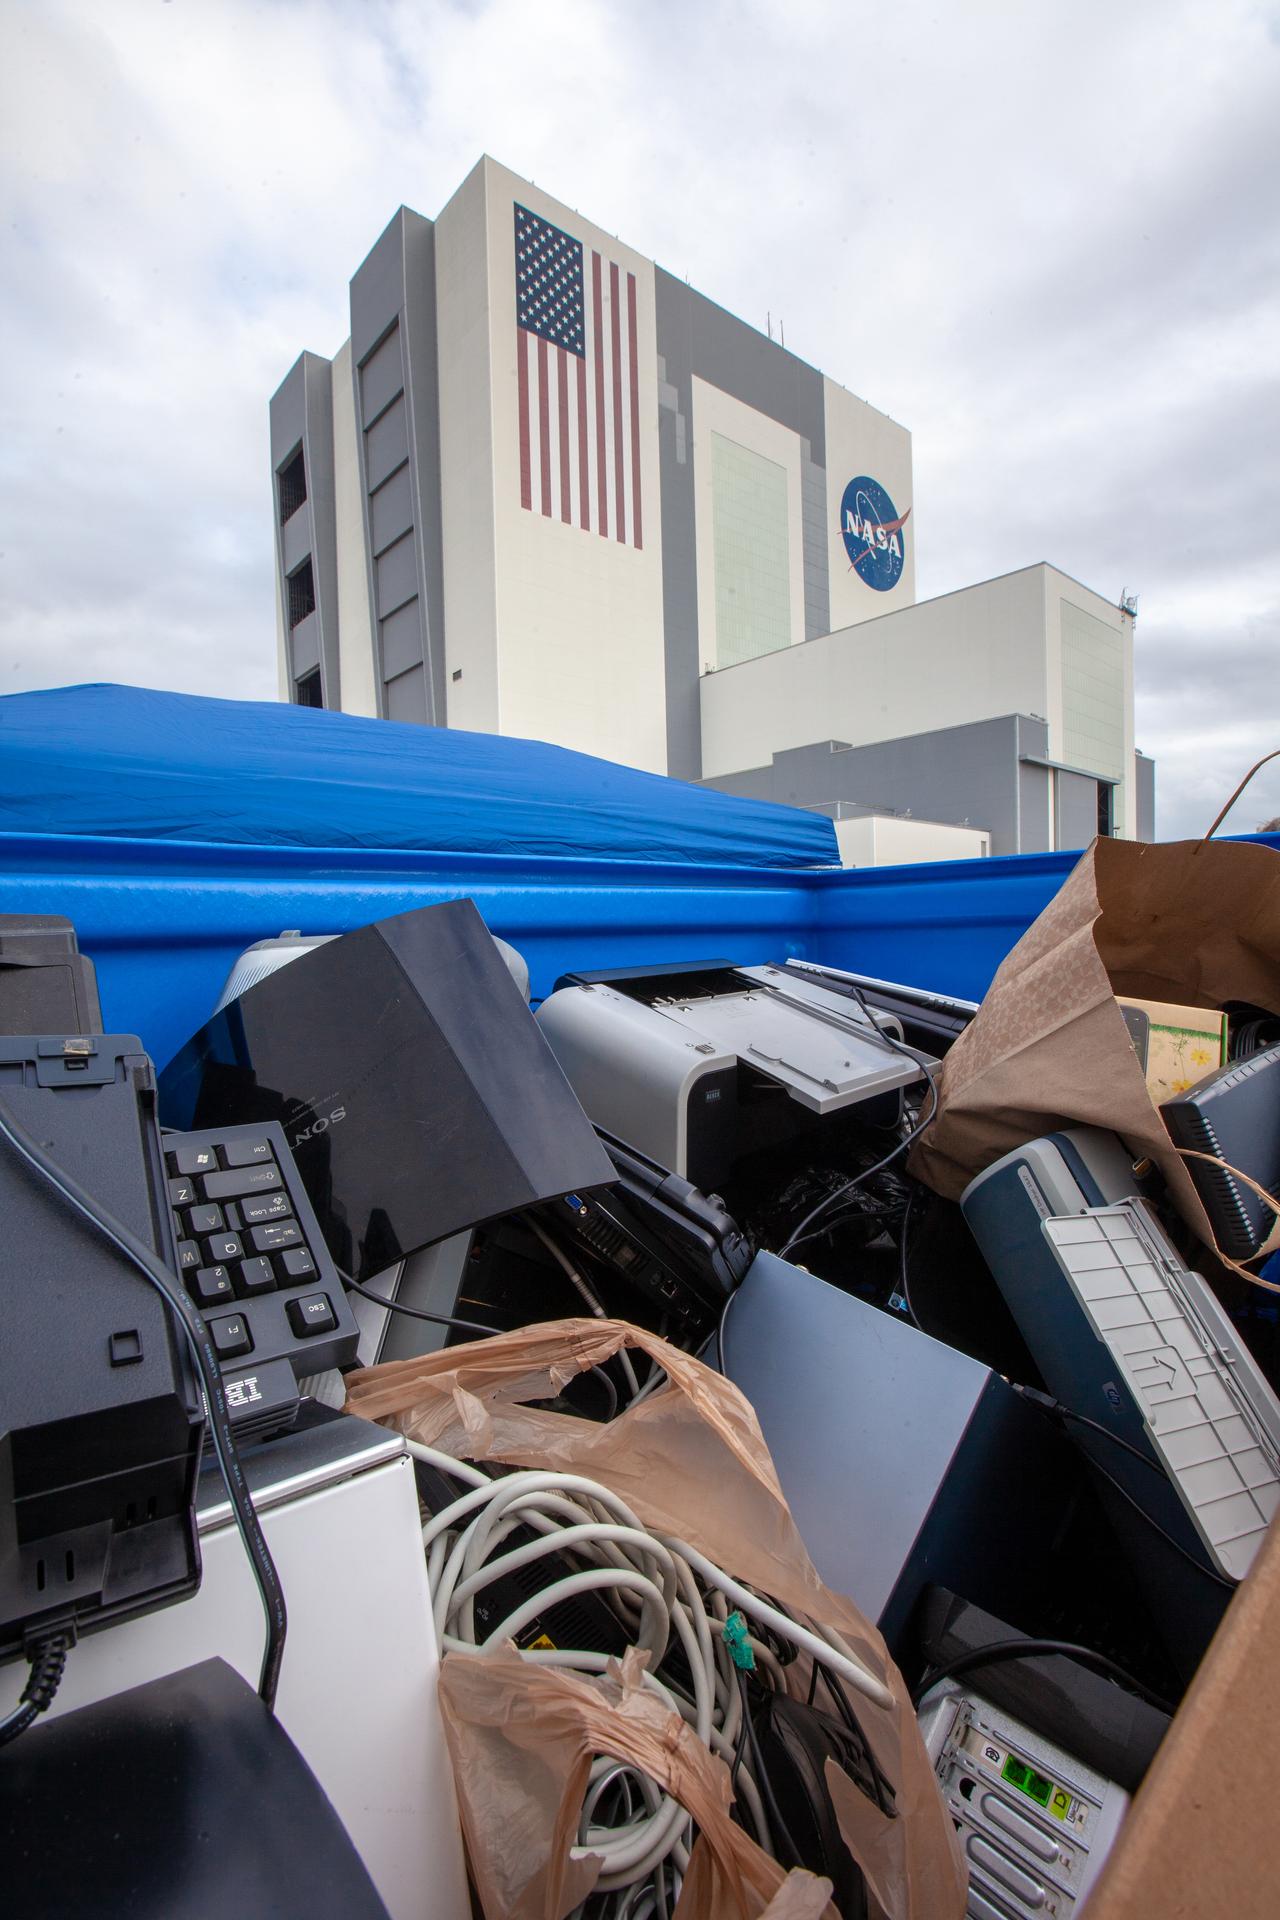 A two-day America Recycles Day event was held at Kennedy Space Center Nov. 13-14, 2019